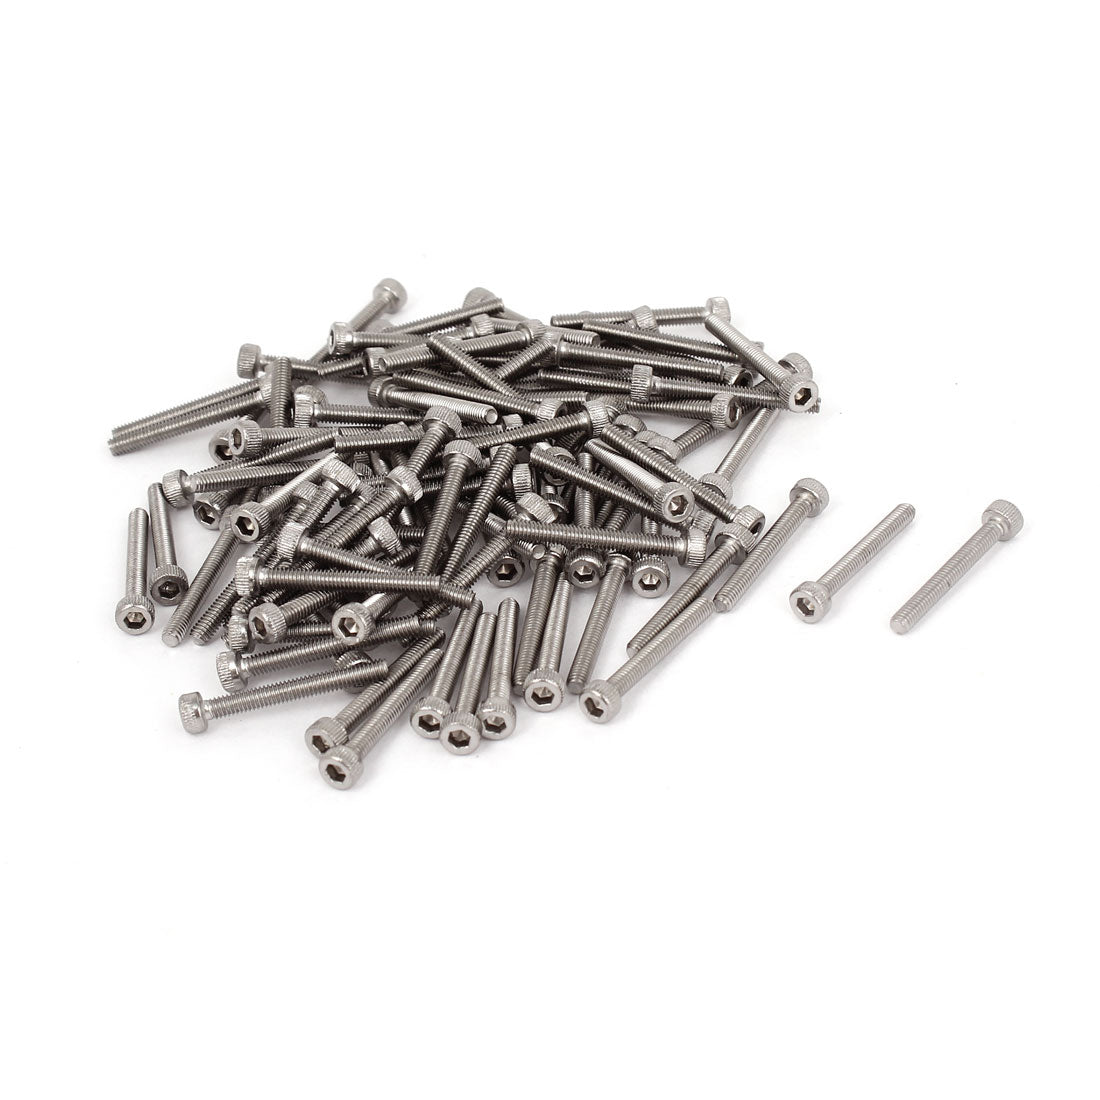 uxcell Uxcell M2.5x20mm 0.45mm Pitch Stainless Steel Bolts Hex Socket Cap Head Screws 100pcs